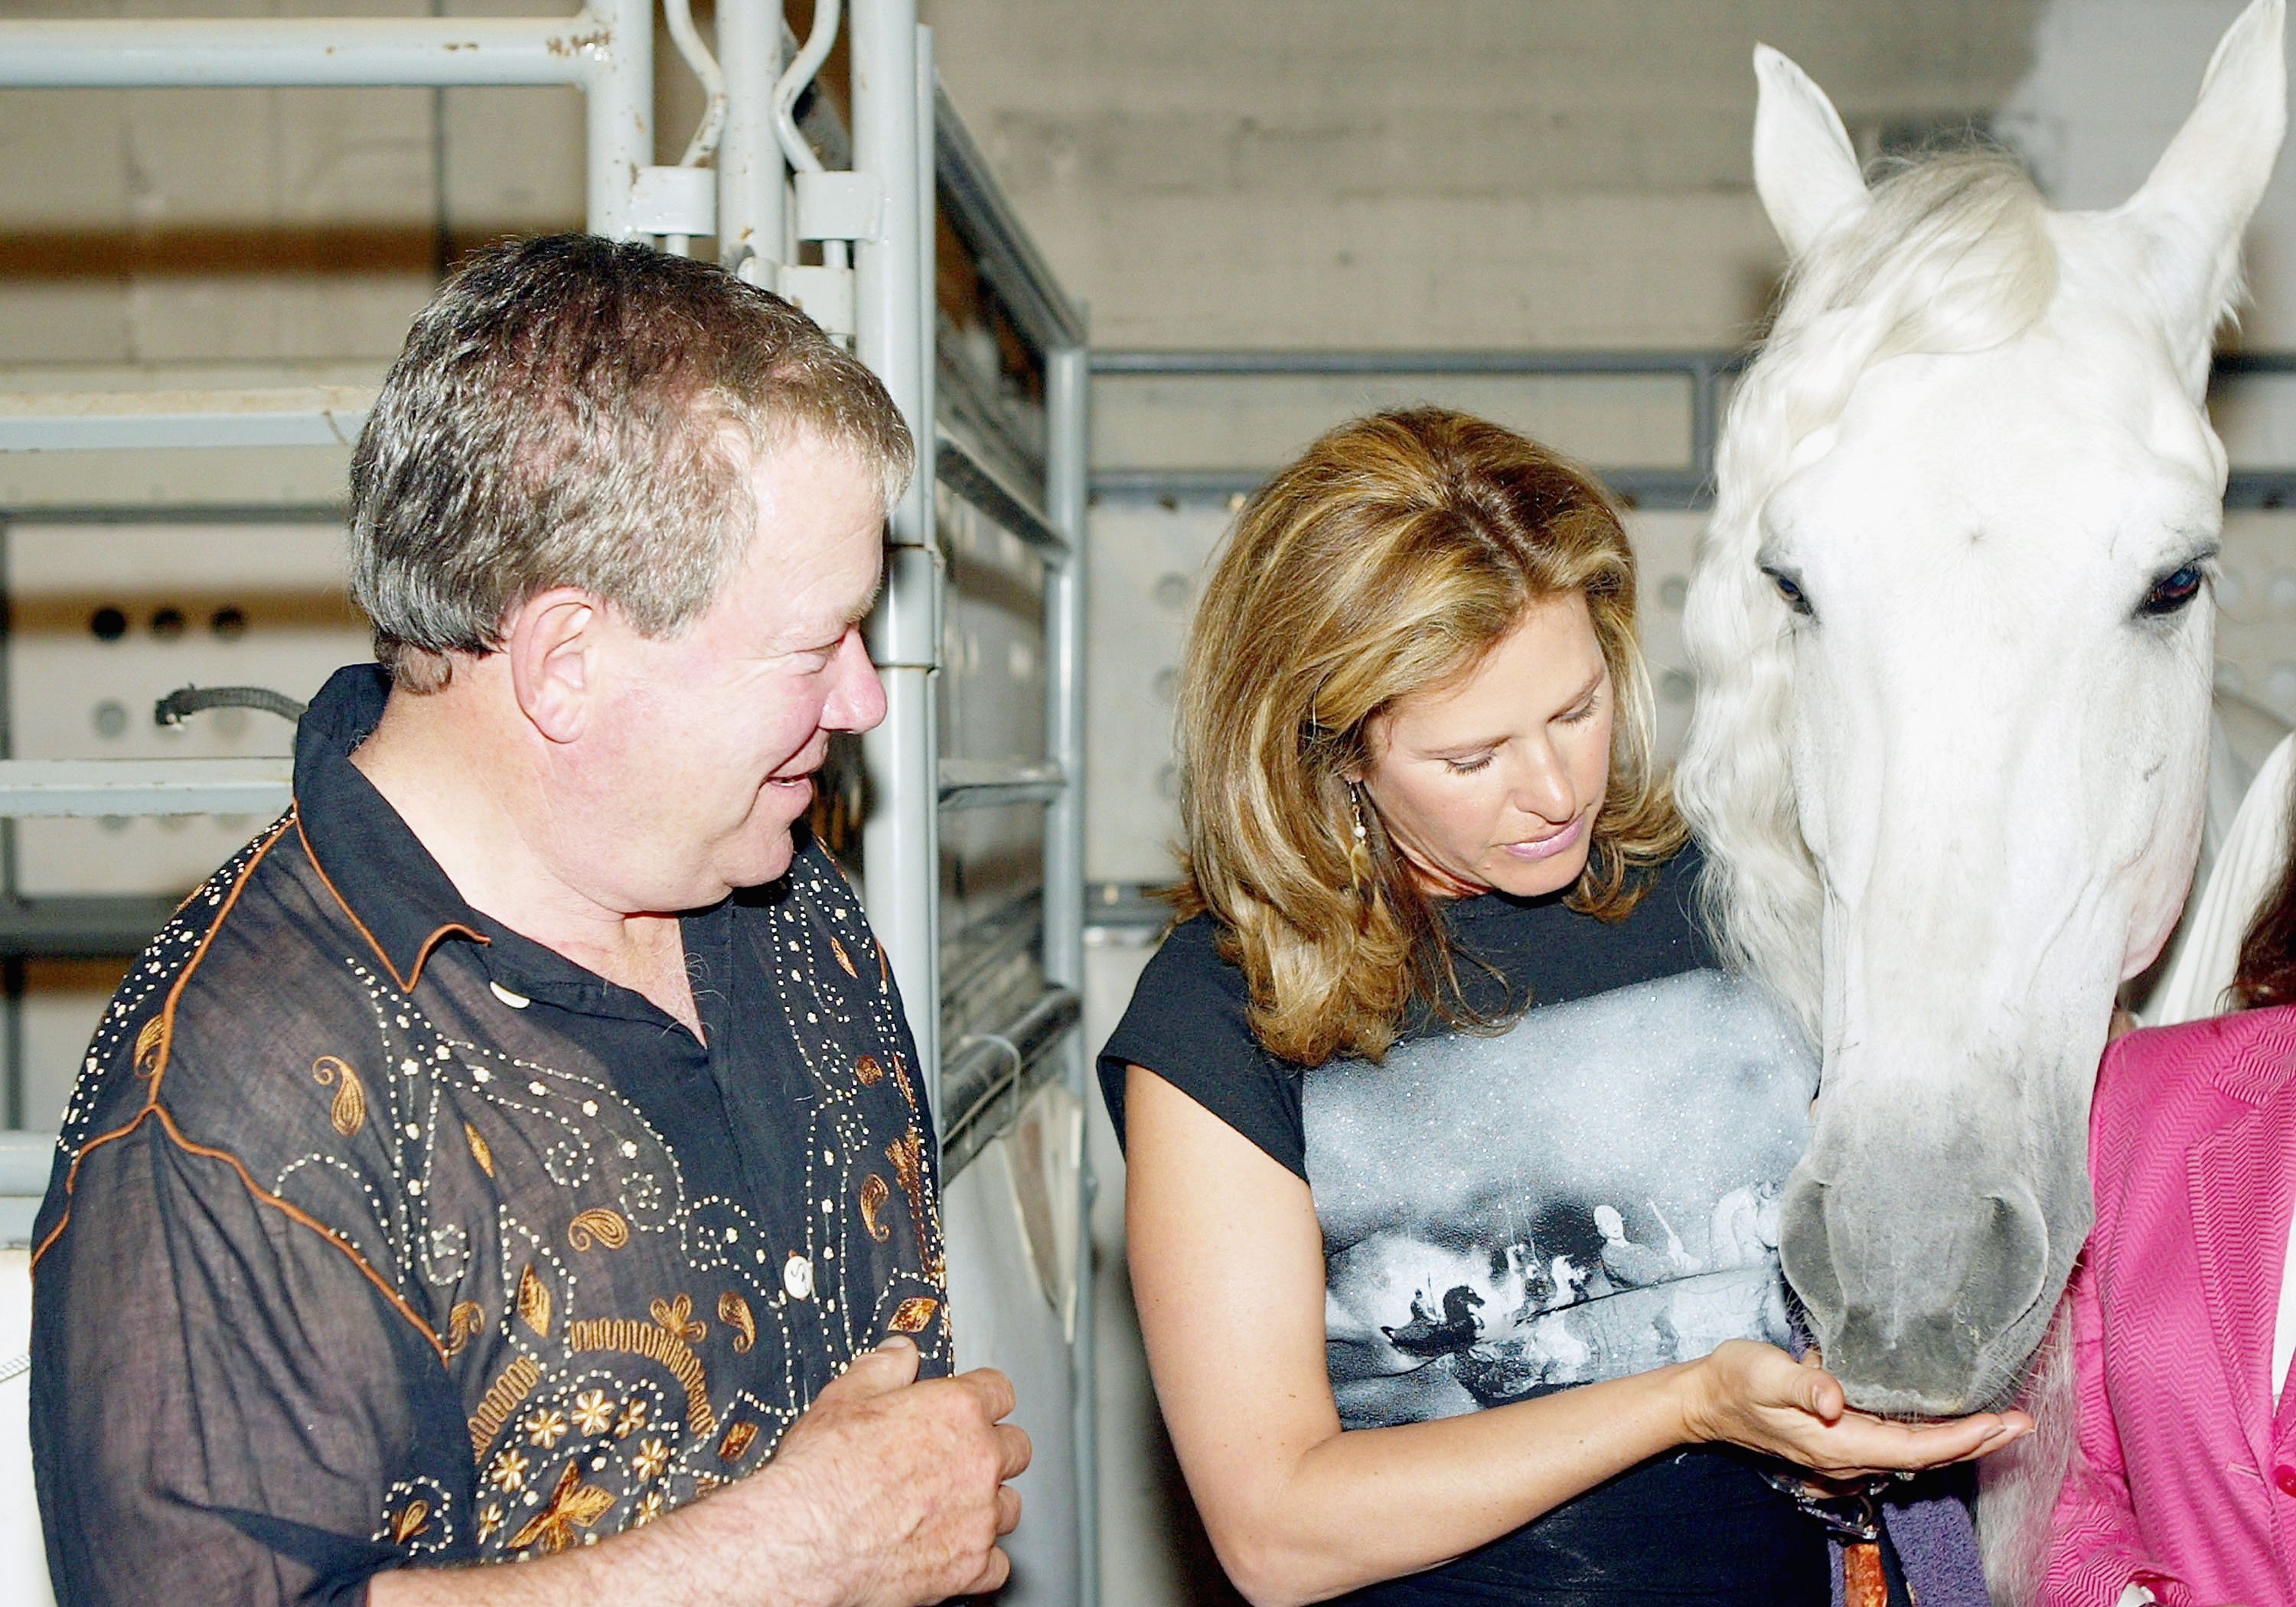 William Shatner and Elizabeth Anderson Martin in California on May 8, 2004 | Source: Getty Images 